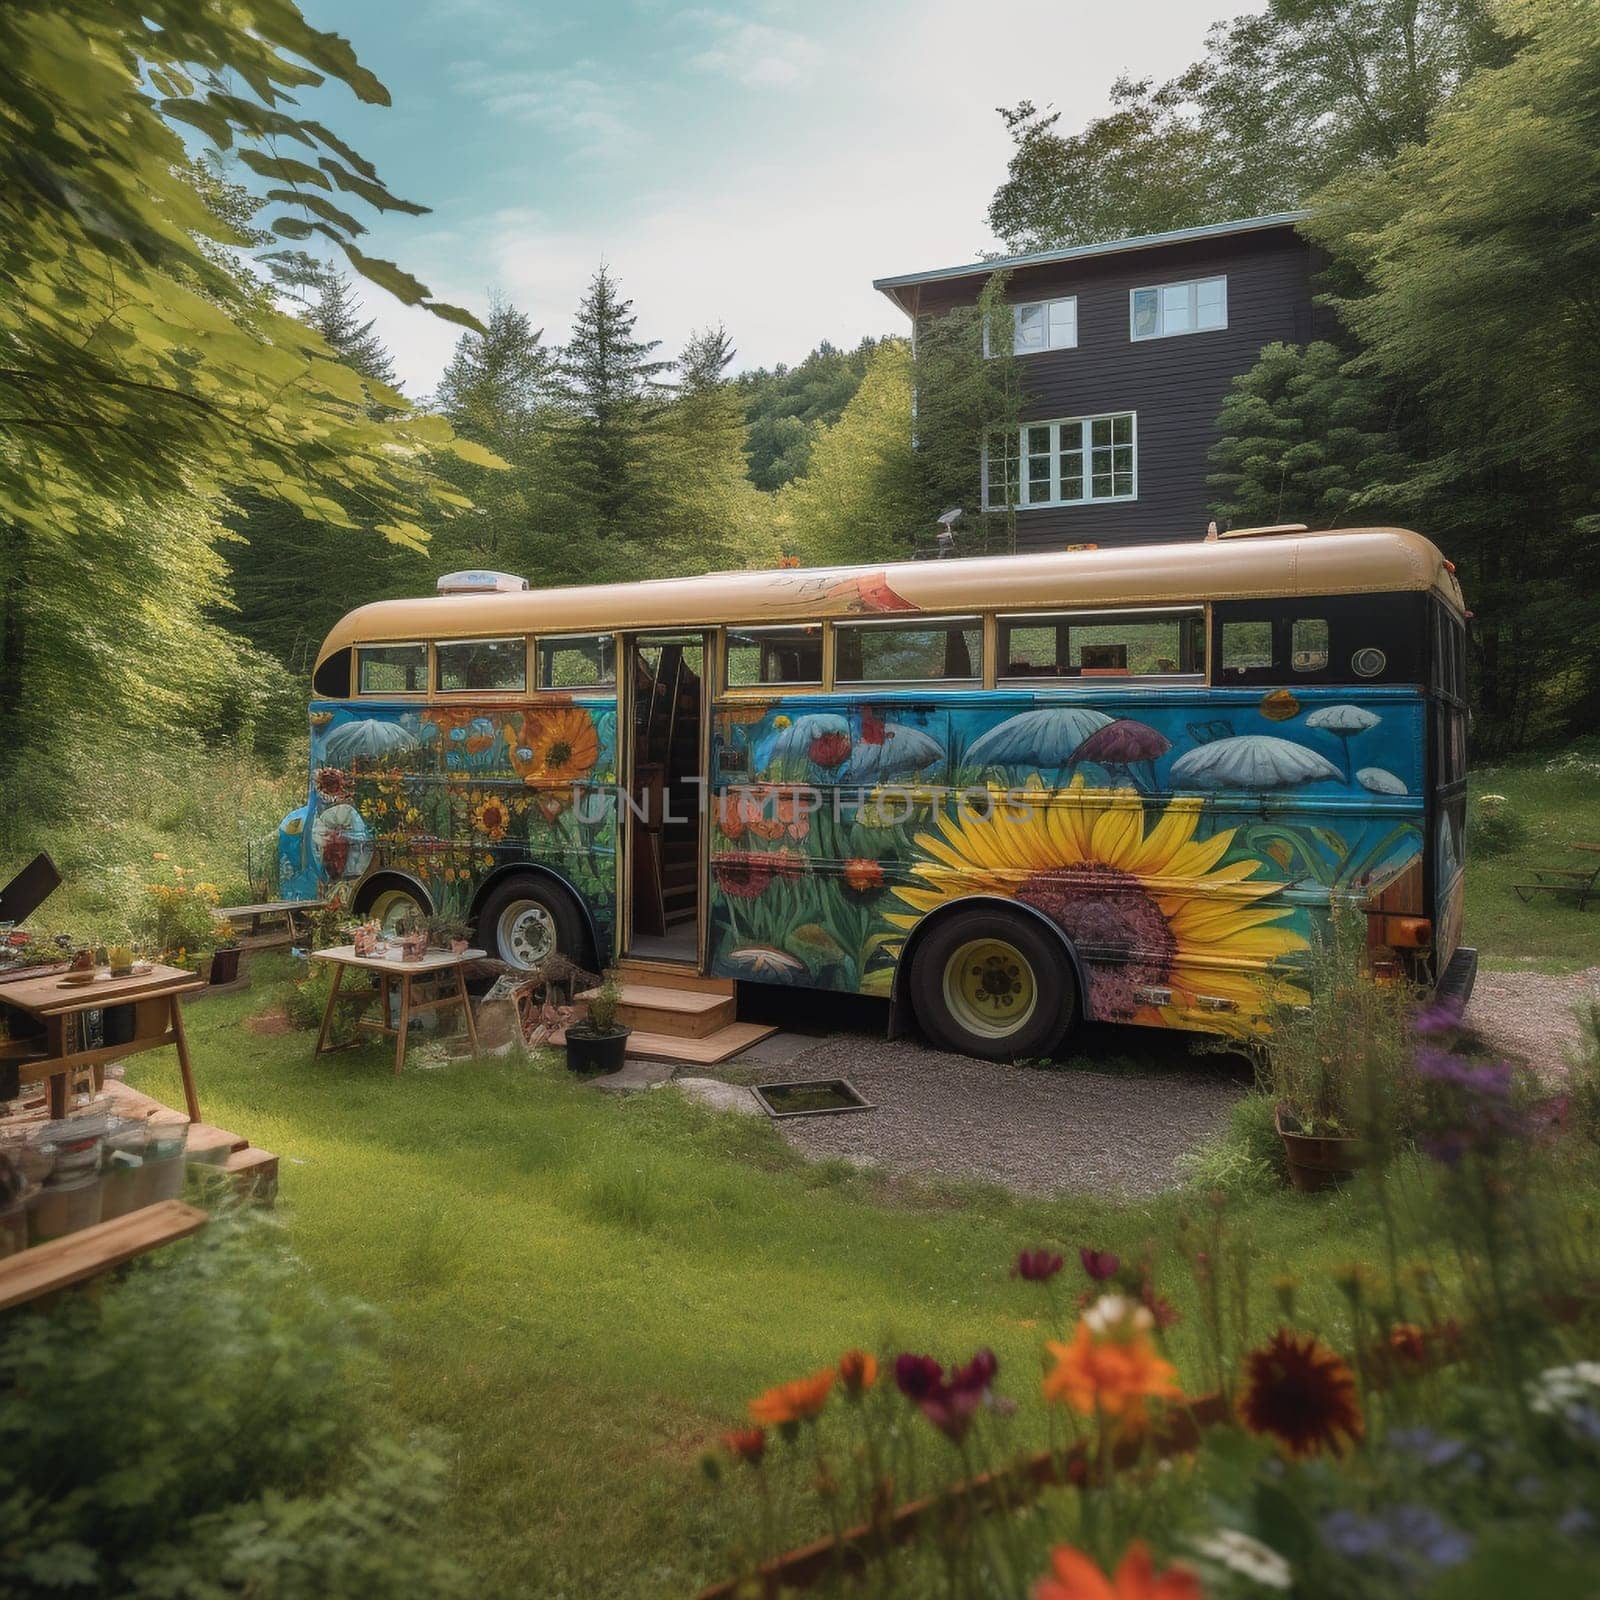 This charming image features a converted school bus parked in a secluded meadow, surrounded by wildflowers and a babbling brook. The bus's exterior is painted with a colorful and eye-catching mural, reflecting the creativity and artistic spirit of the occupants. On the roof of the bus, a small vegetable garden is visible, providing fresh ingredients for meals and adding to the self-sufficient and sustainable lifestyle of the bus life. Outside the bus, a small wood-fired pizza oven is visible, offering a cozy spot to cook homemade pizzas and enjoy the warm summer evenings with friends and family.